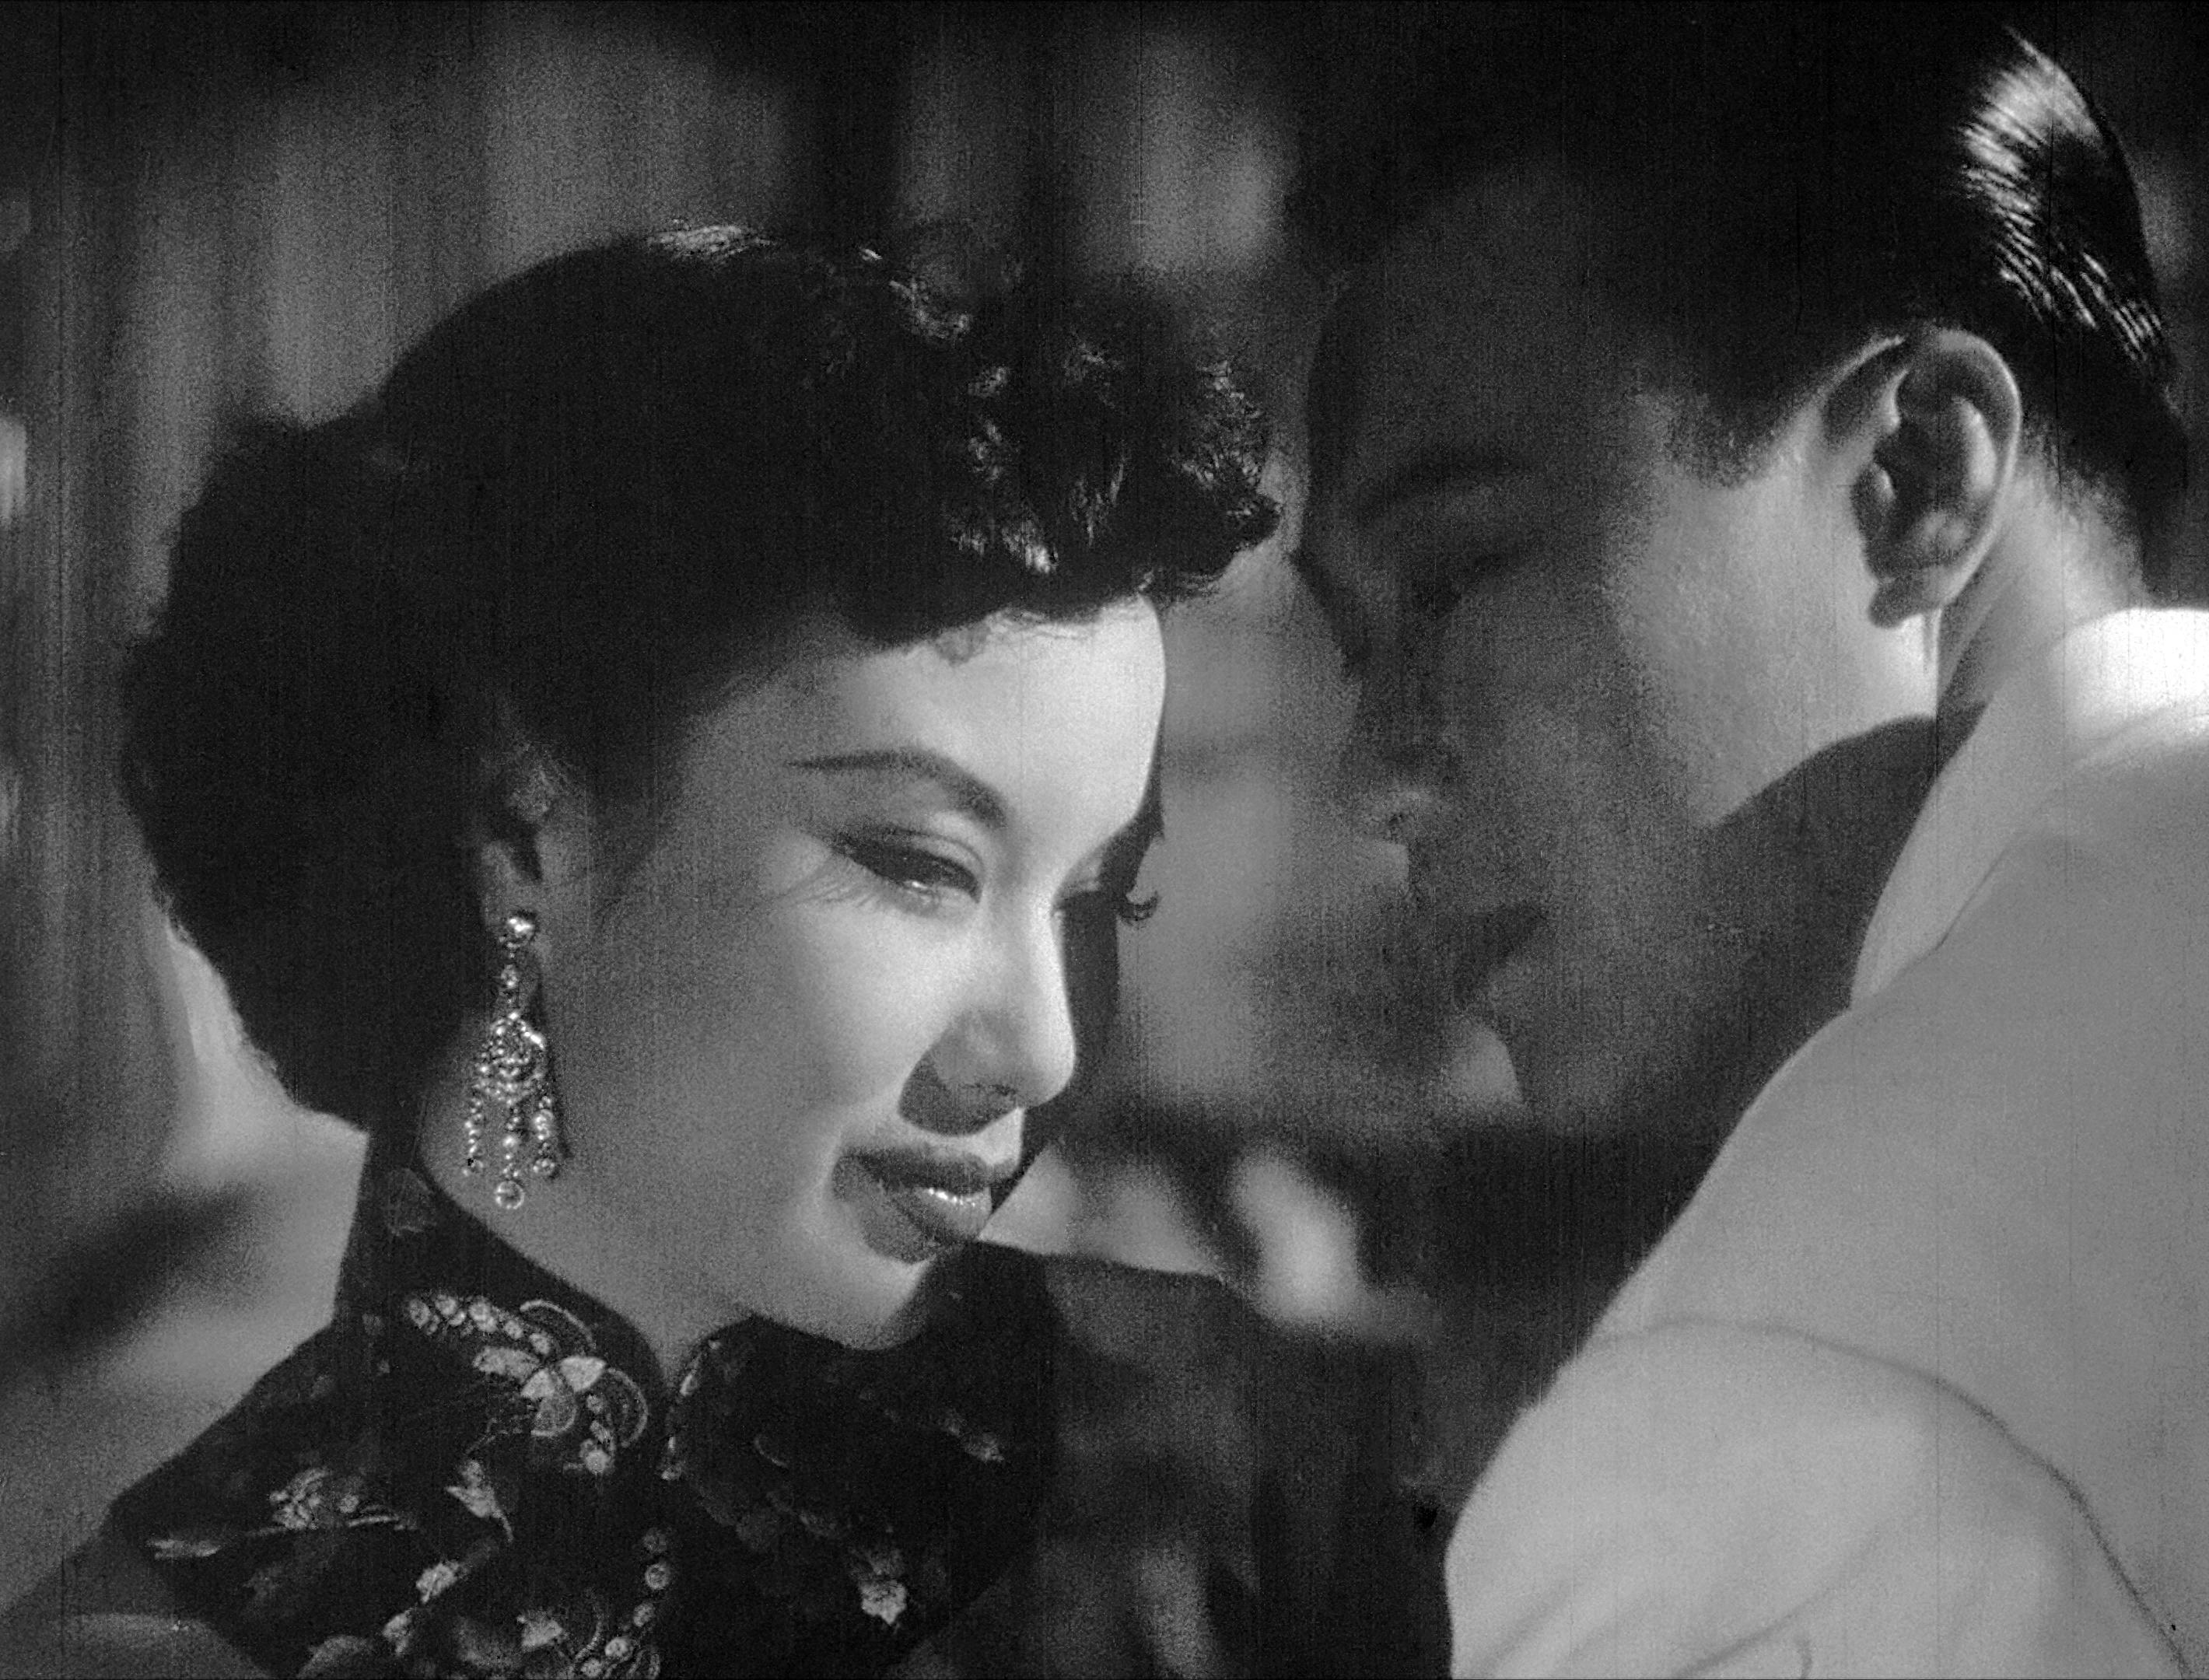 The Hong Kong Film Archive (HKFA) of the Leisure and Cultural Services Department will screen five films in relation to the current exhibition "Cinderella and Her Qipao" at the HKFA Cinema from January 14 to May 5 next year to offer audiences glimpses of the glamour and beauty of qipao costumes in films. Photo shows a film still of "Modern 'Red Chamber Dream'" (1952).